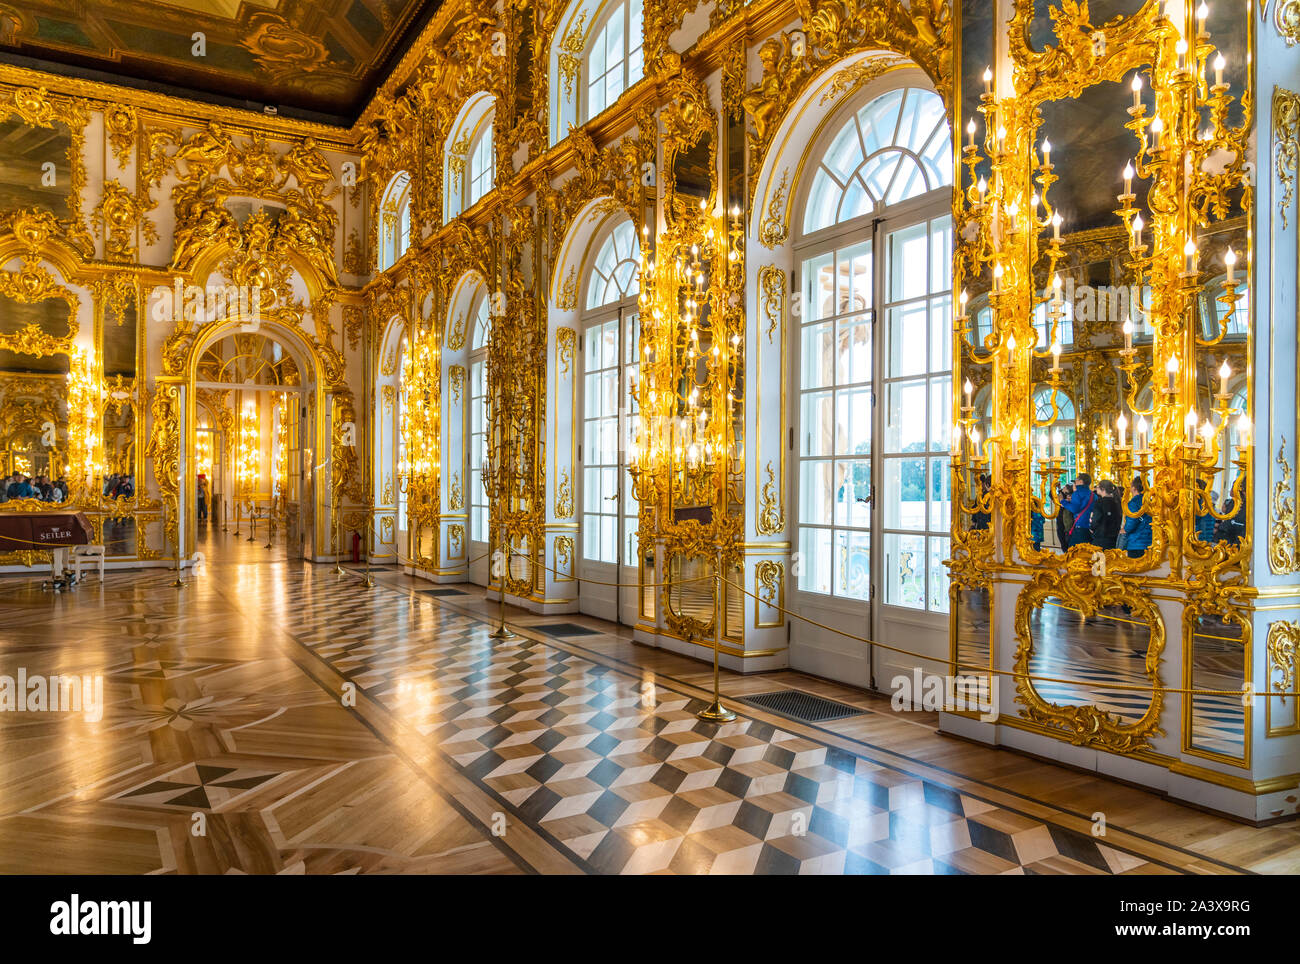 Interior of Catherine's Palace in St. Petersburg, Russia Stock Photo - Alamy